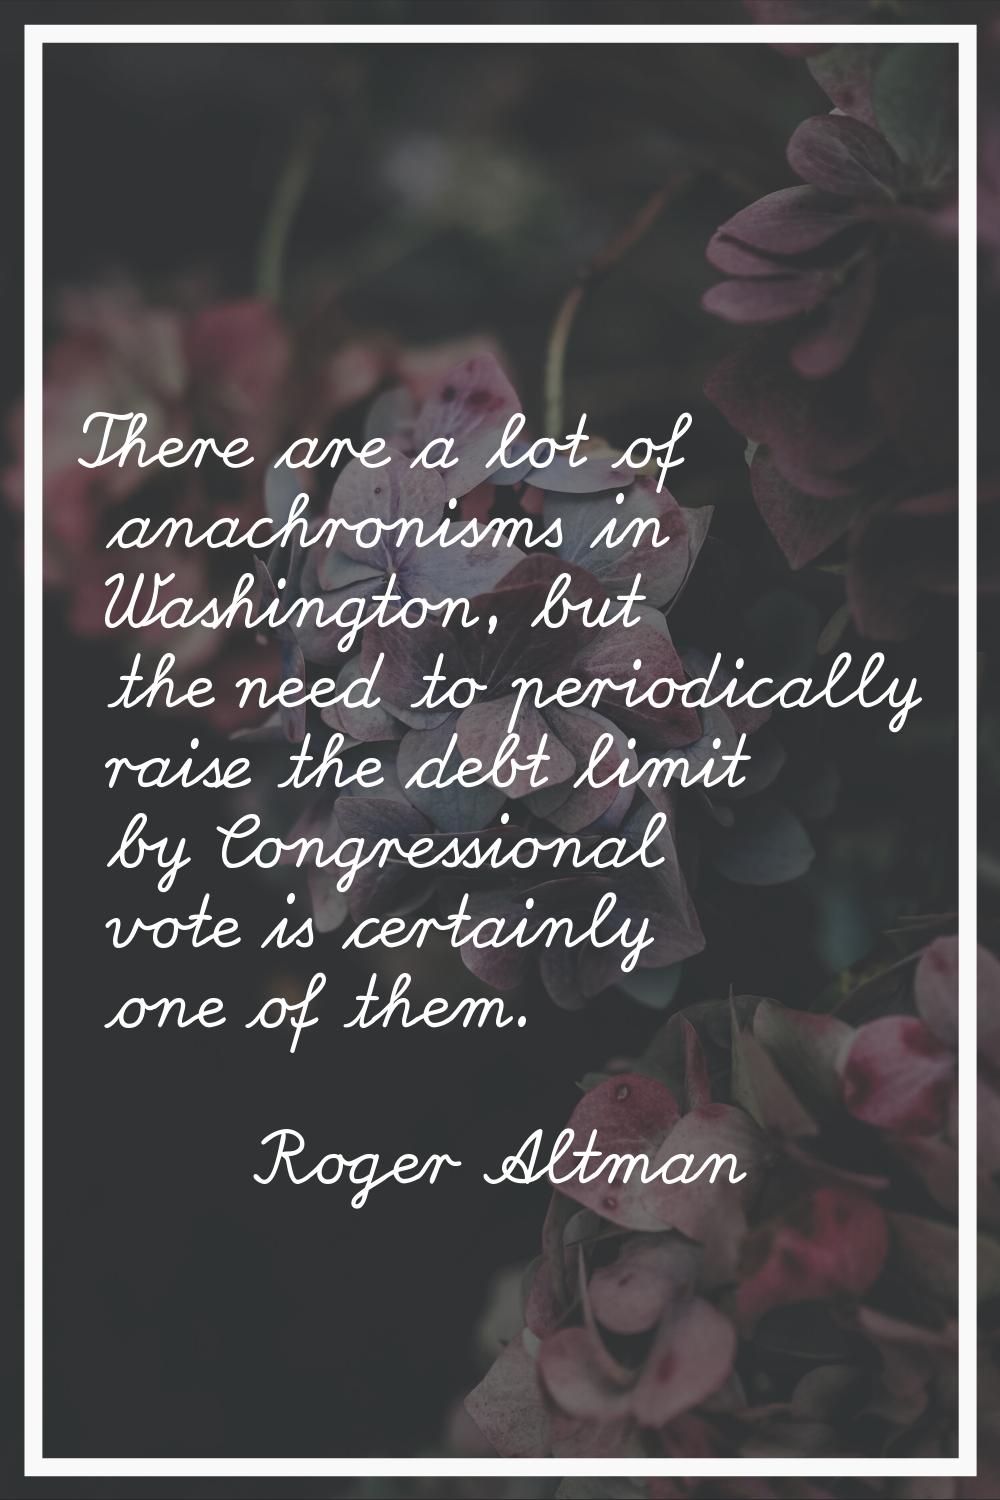 There are a lot of anachronisms in Washington, but the need to periodically raise the debt limit by